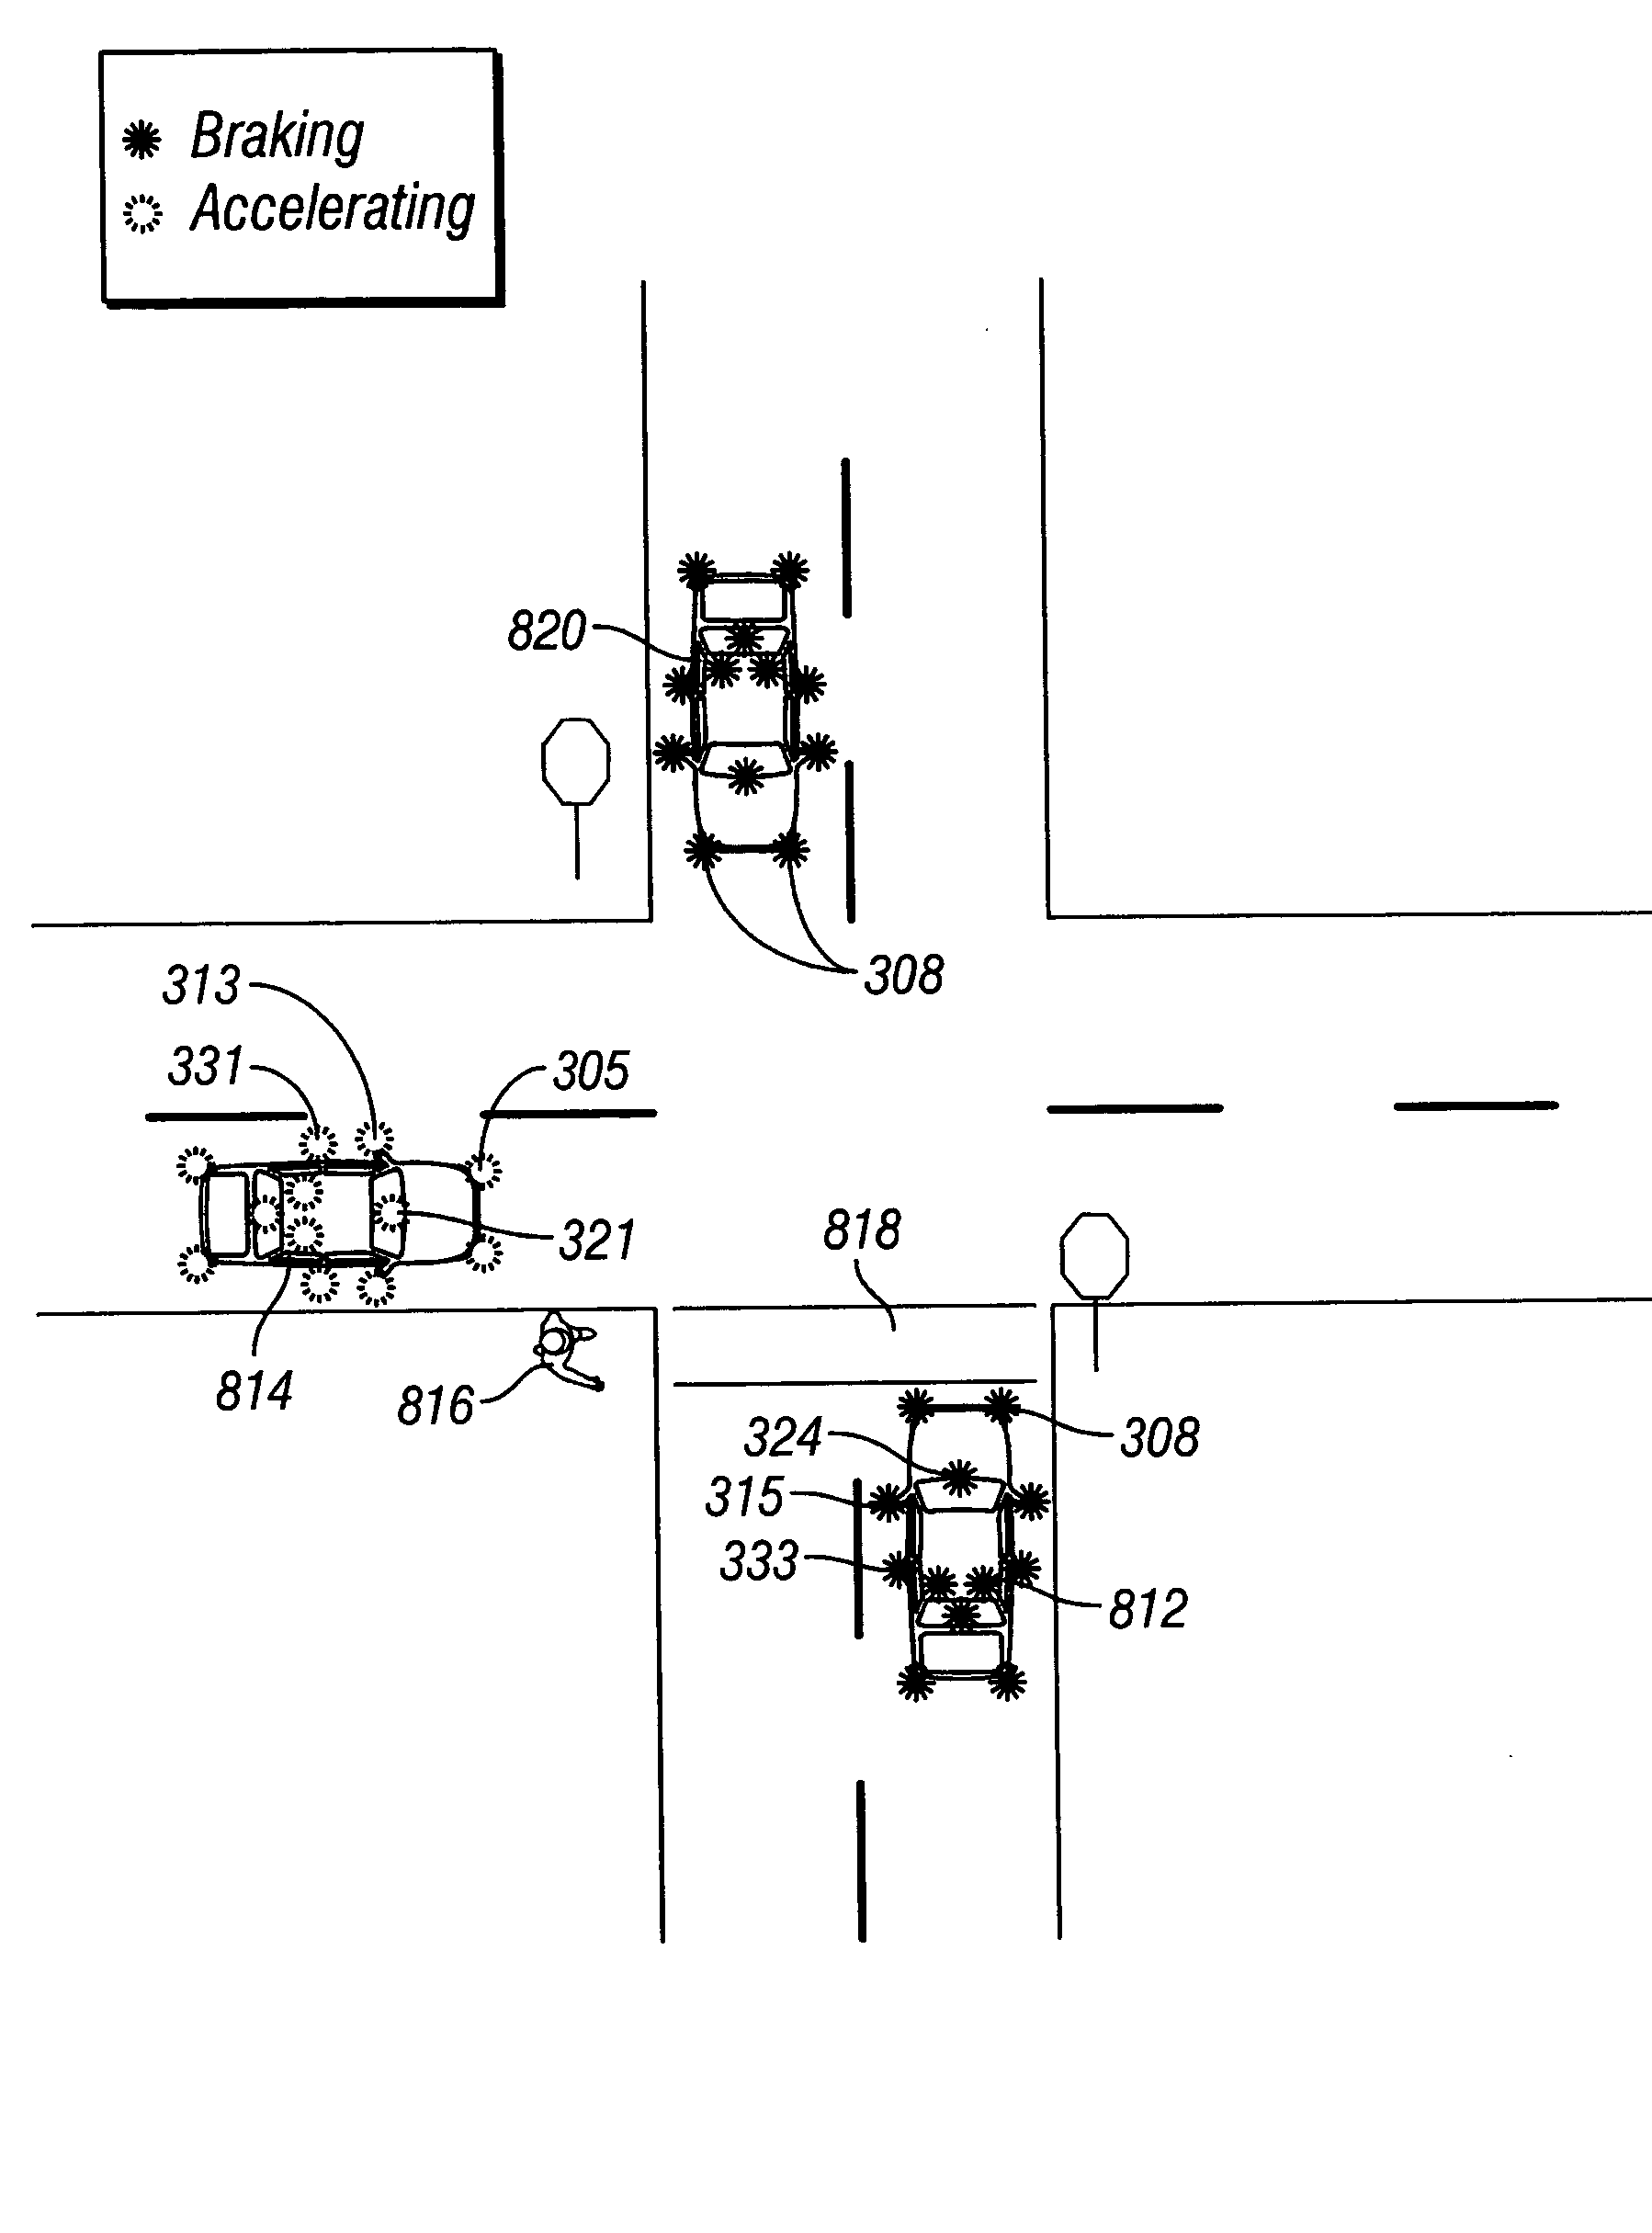 Method for a changing safety signaling system